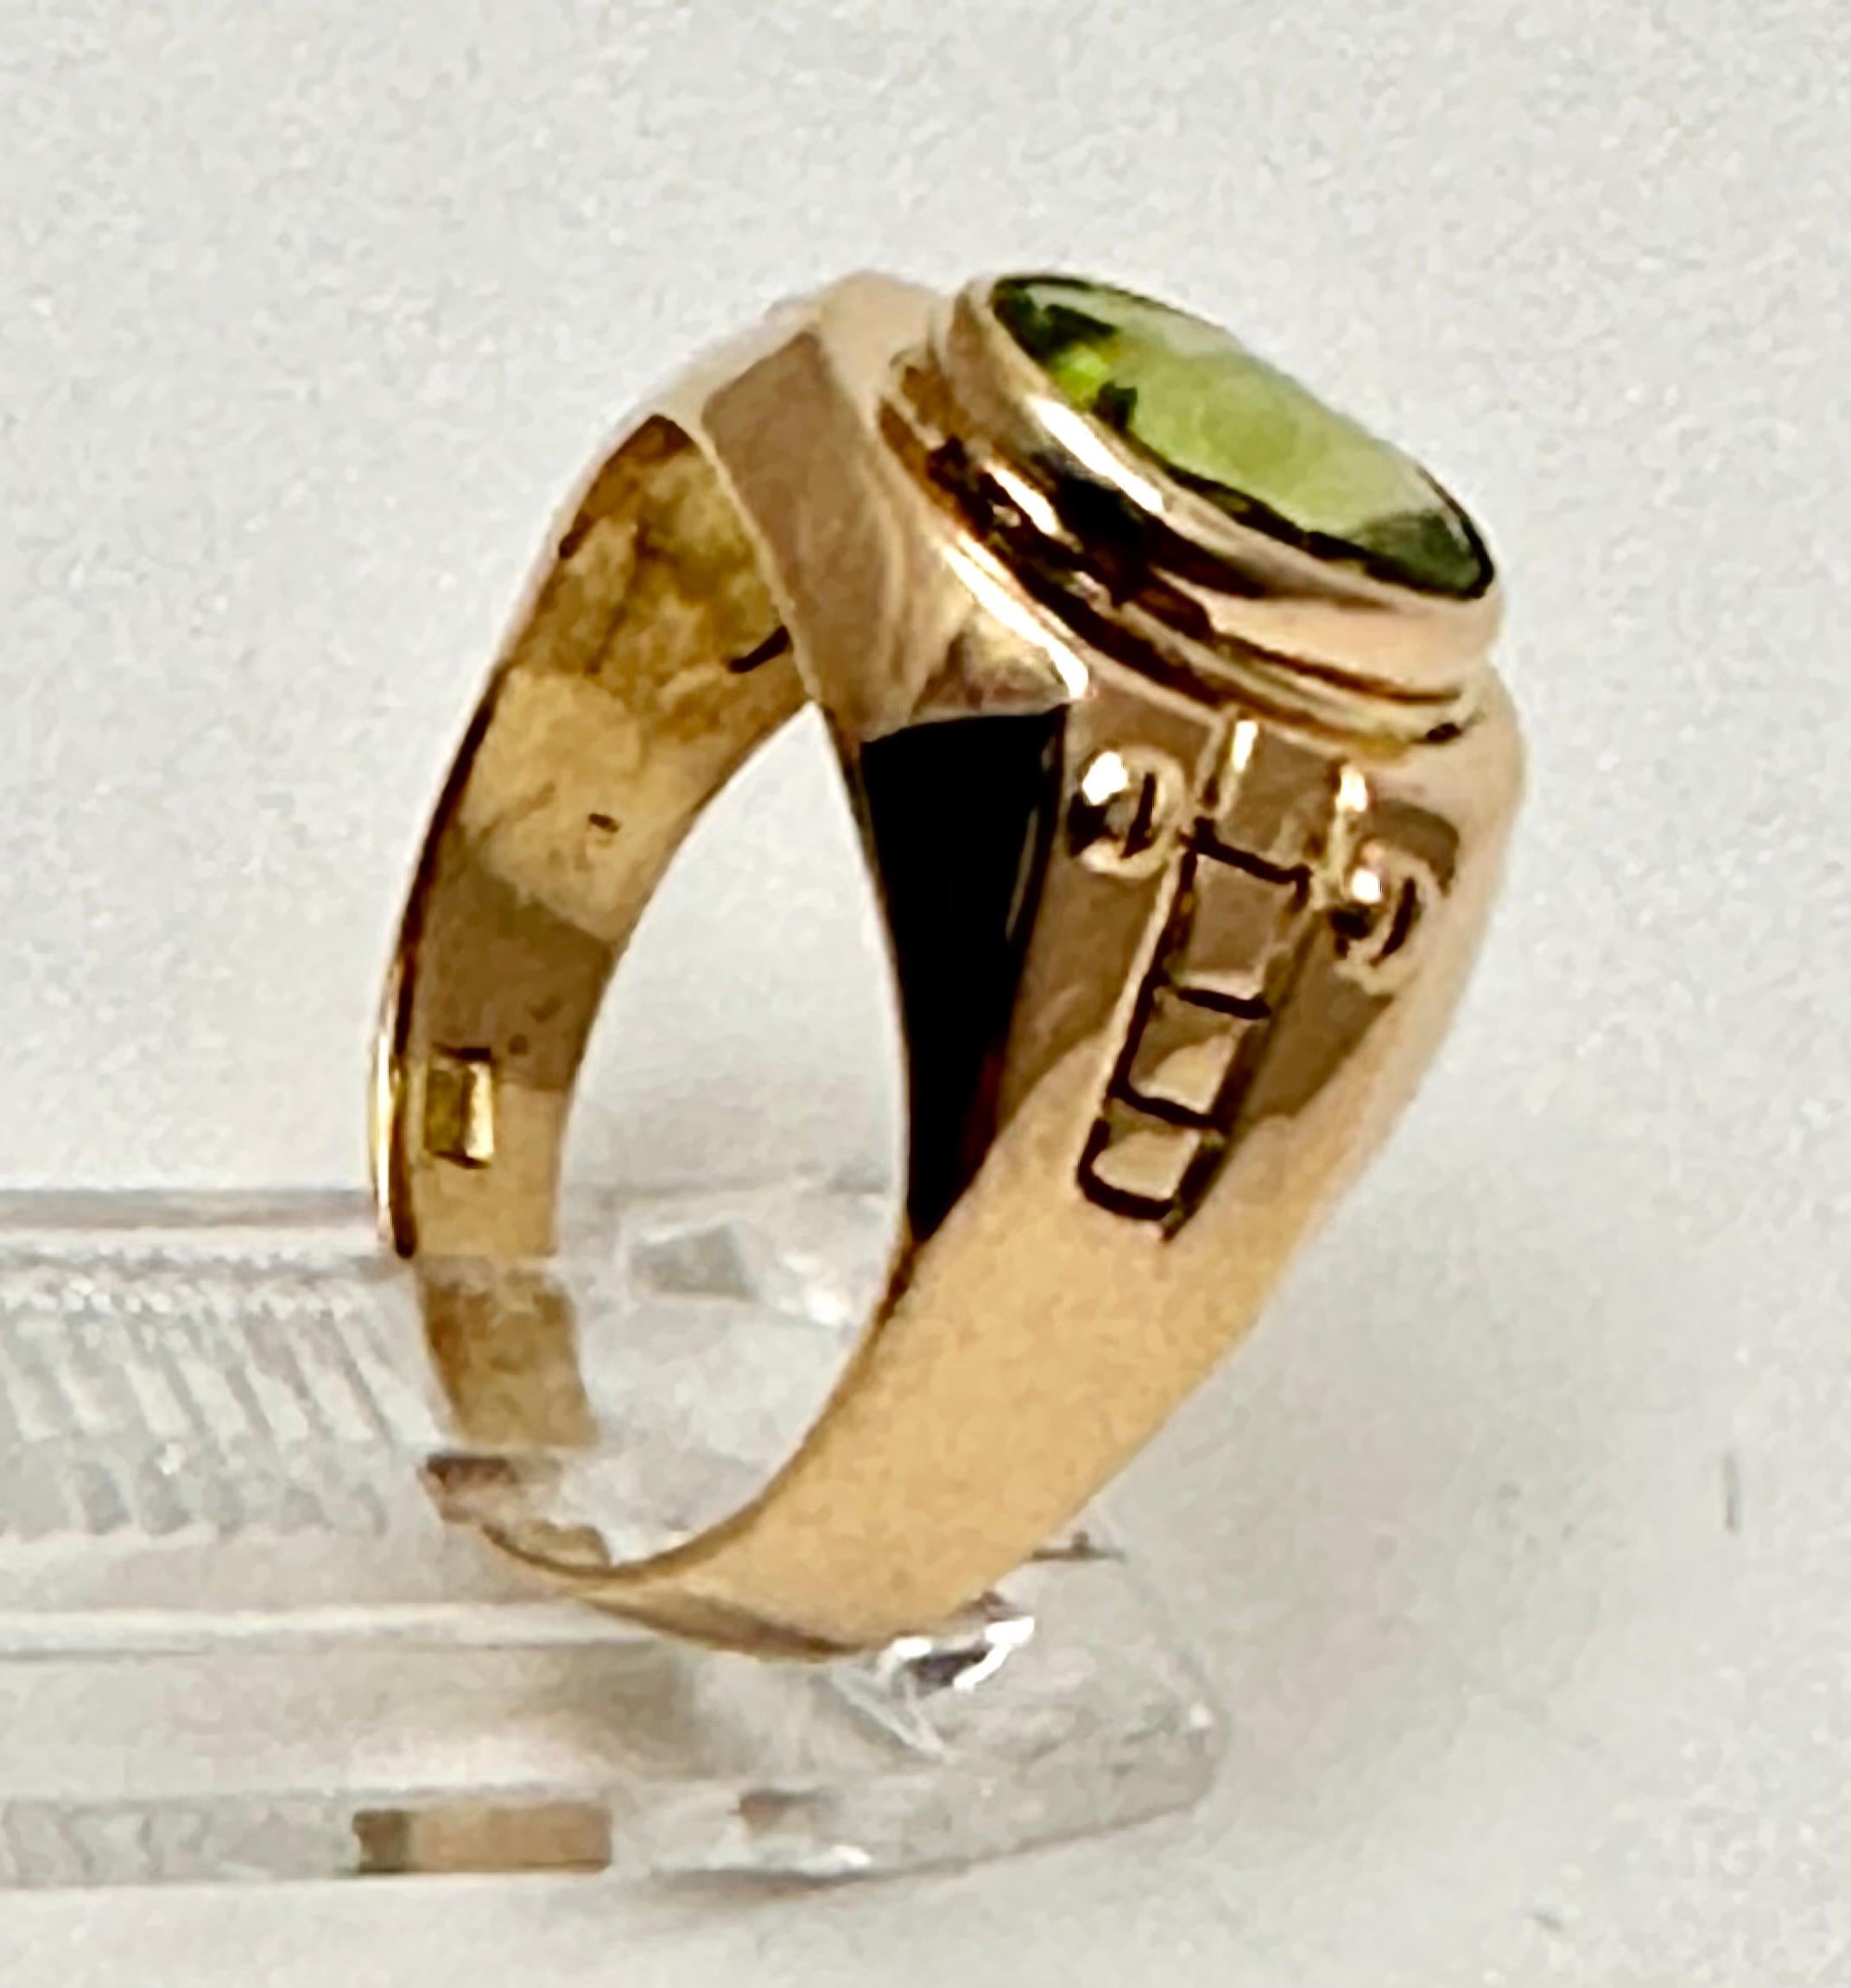 21kt Yellow Gold 8mm x 9mm Oval Peridot Ring Size 5 3/4 In Excellent Condition For Sale In Las Vegas, NV